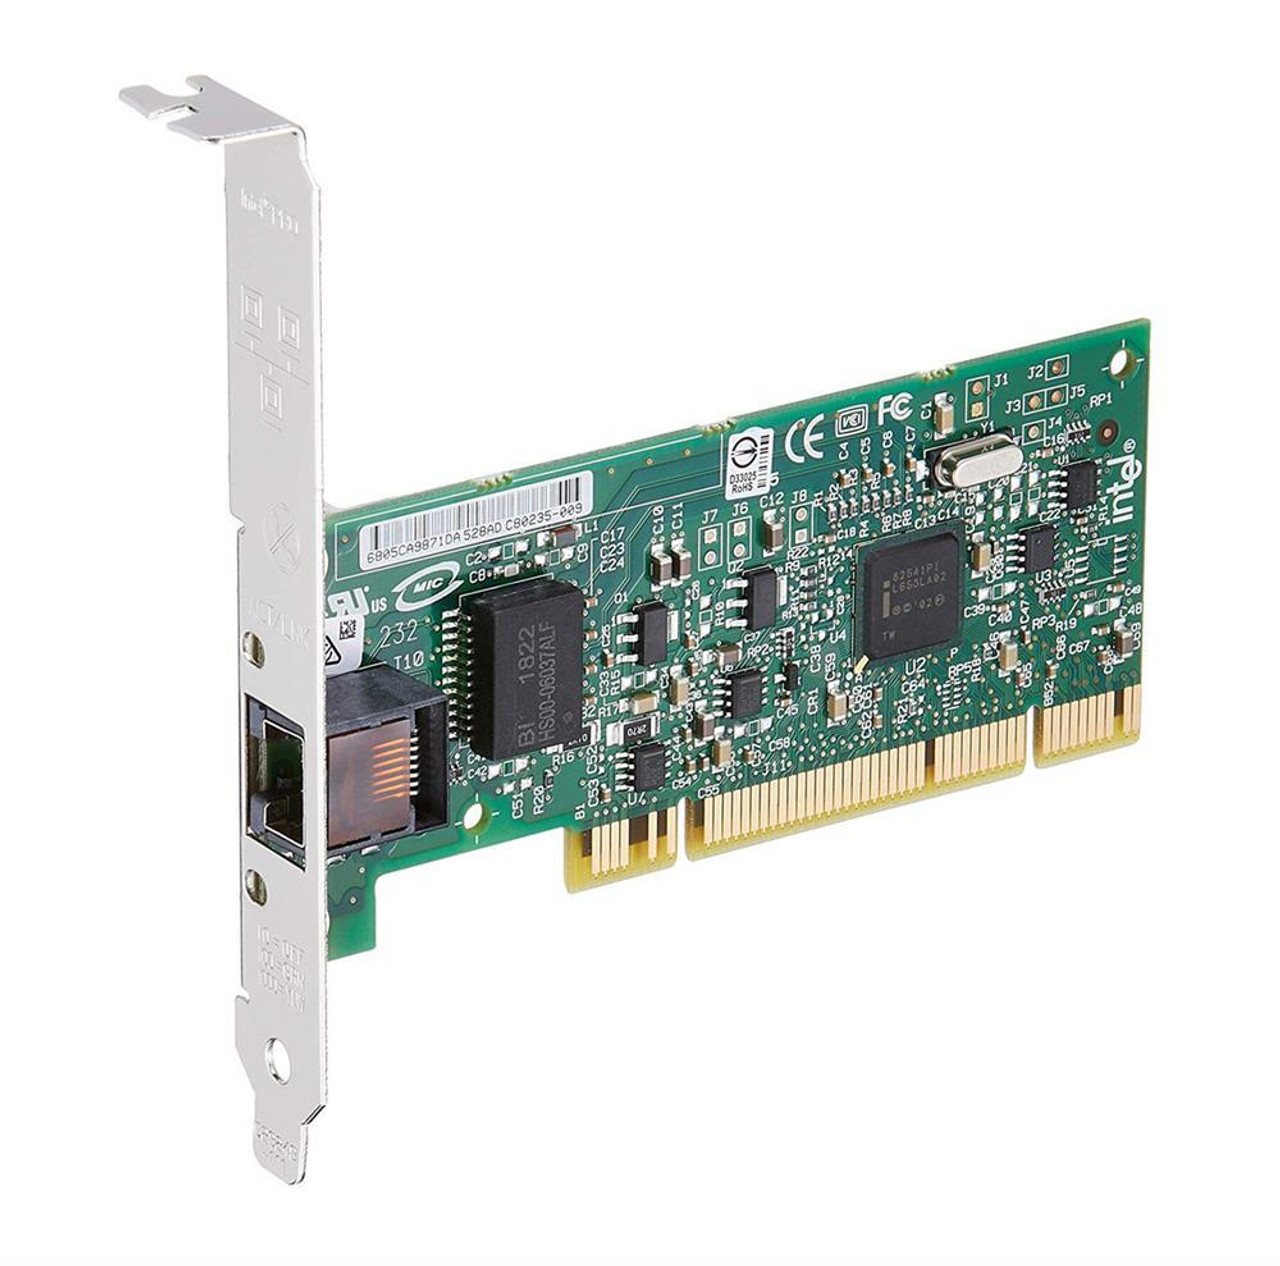 PWLA8391GT-AO AddOn Intel PWLA8391GT Comparable 10/100/1000Mbs Single Open RJ-45 Port 100m Copper PCI Network Interface Card - 100% compatible and guaranteed to